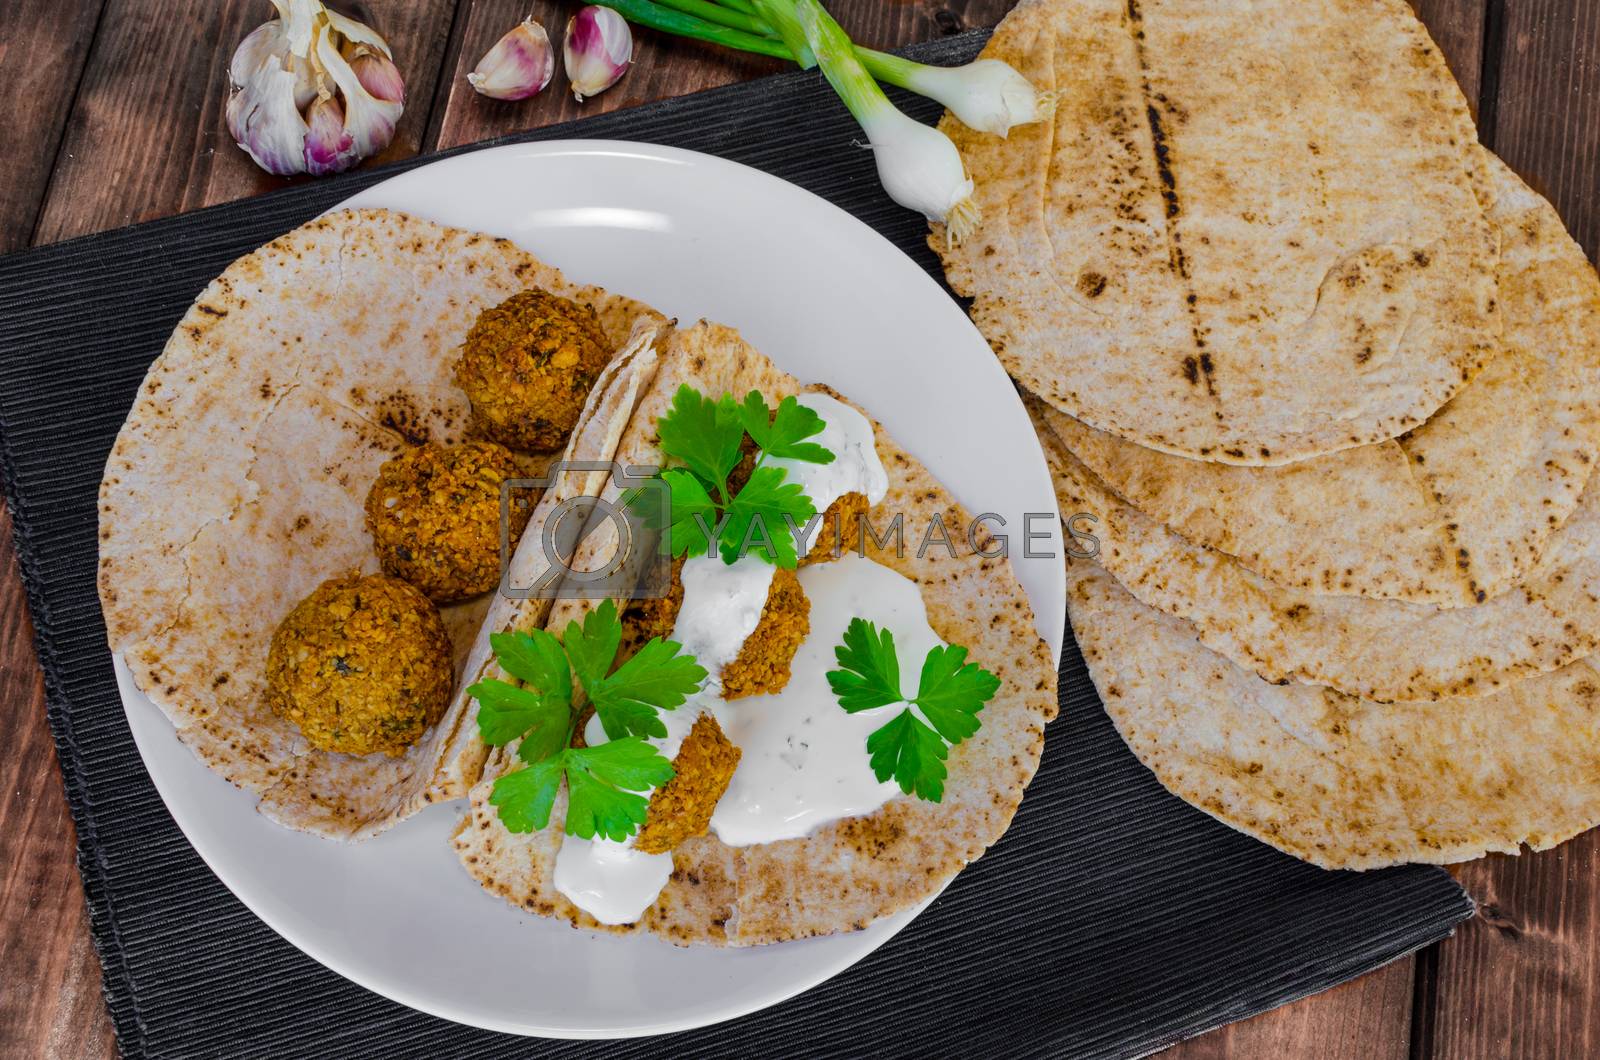 Royalty free image of Chickpea falafel with lebanese bread by Peteer